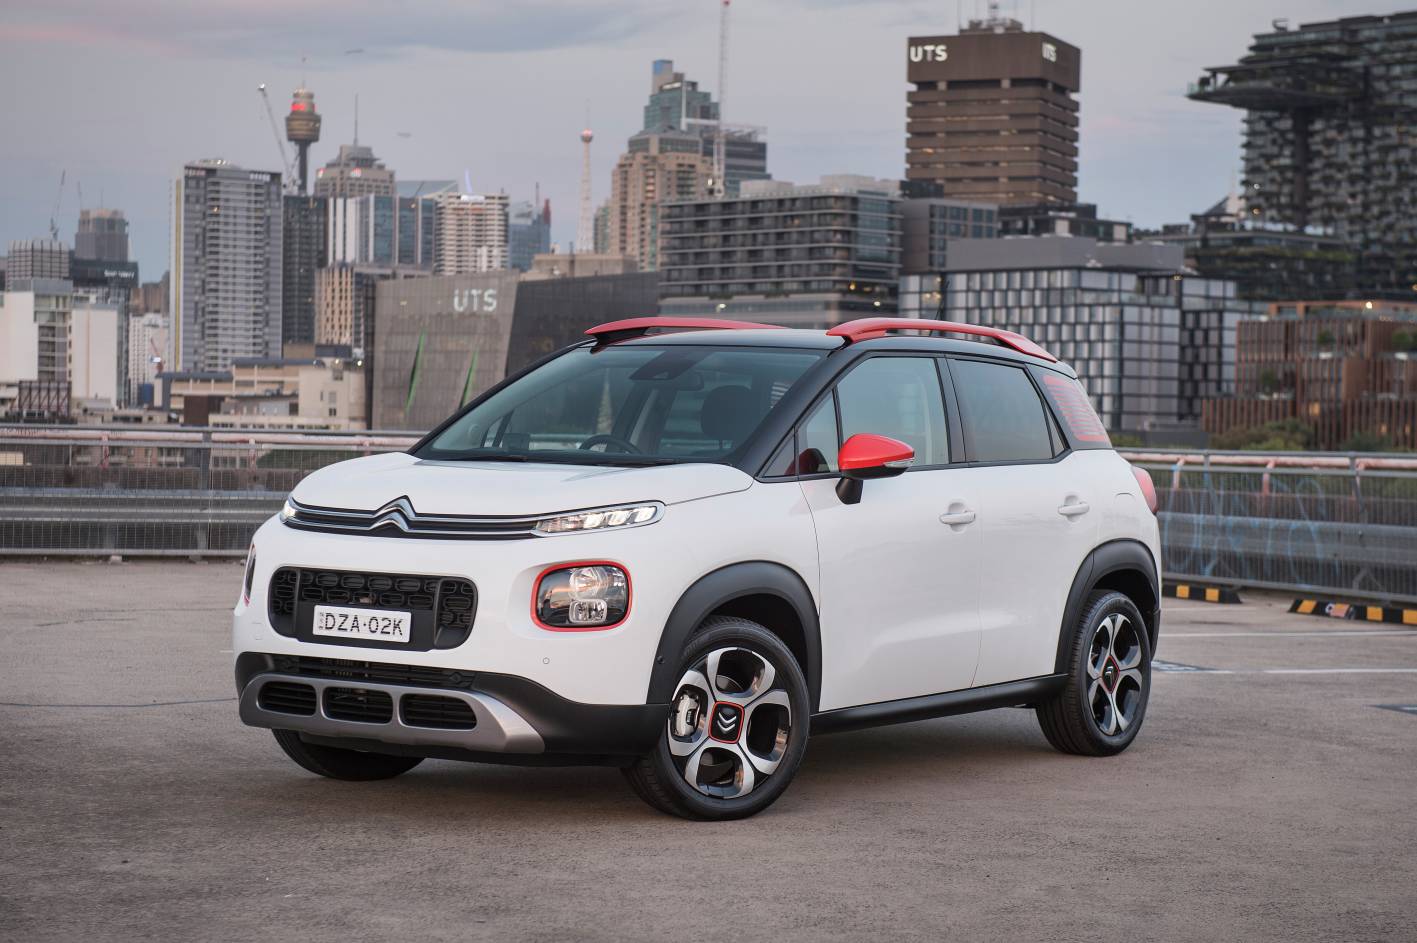 Citroen C3 Aircross SUV an appealing different city SUV